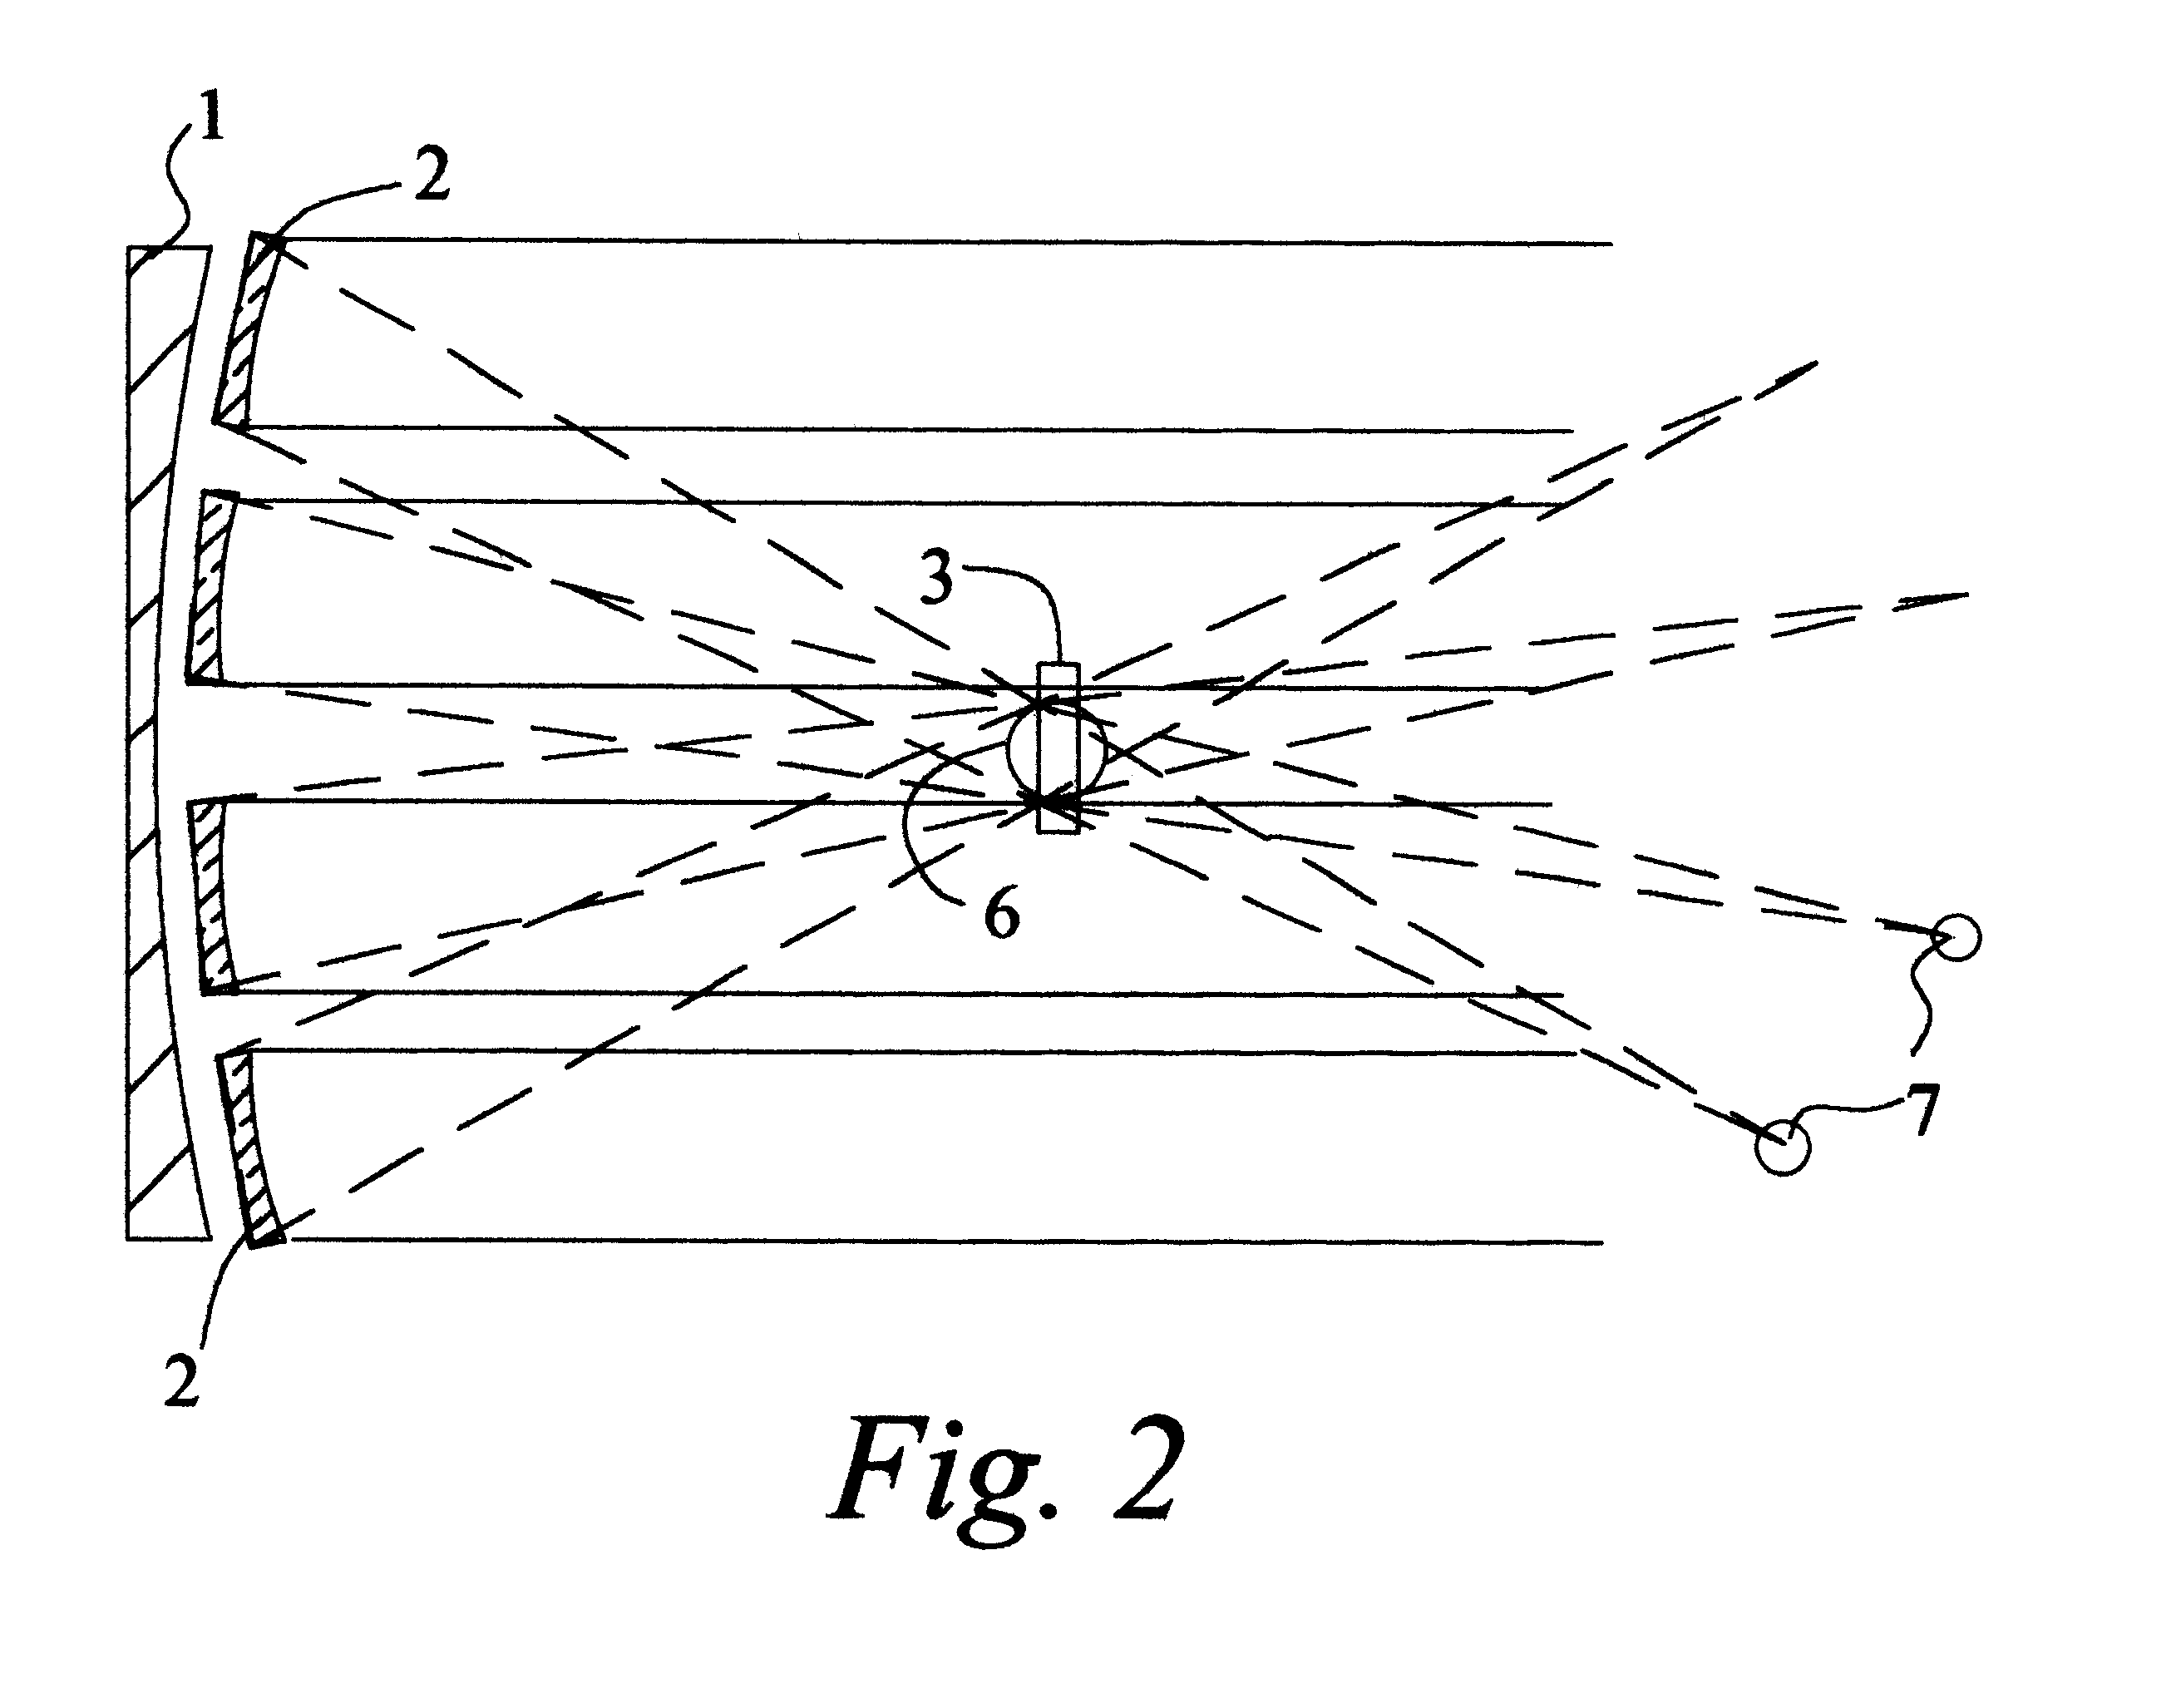 Multi-facet concentrator of solar setup for irradiating the objects placed in a target plane with solar light